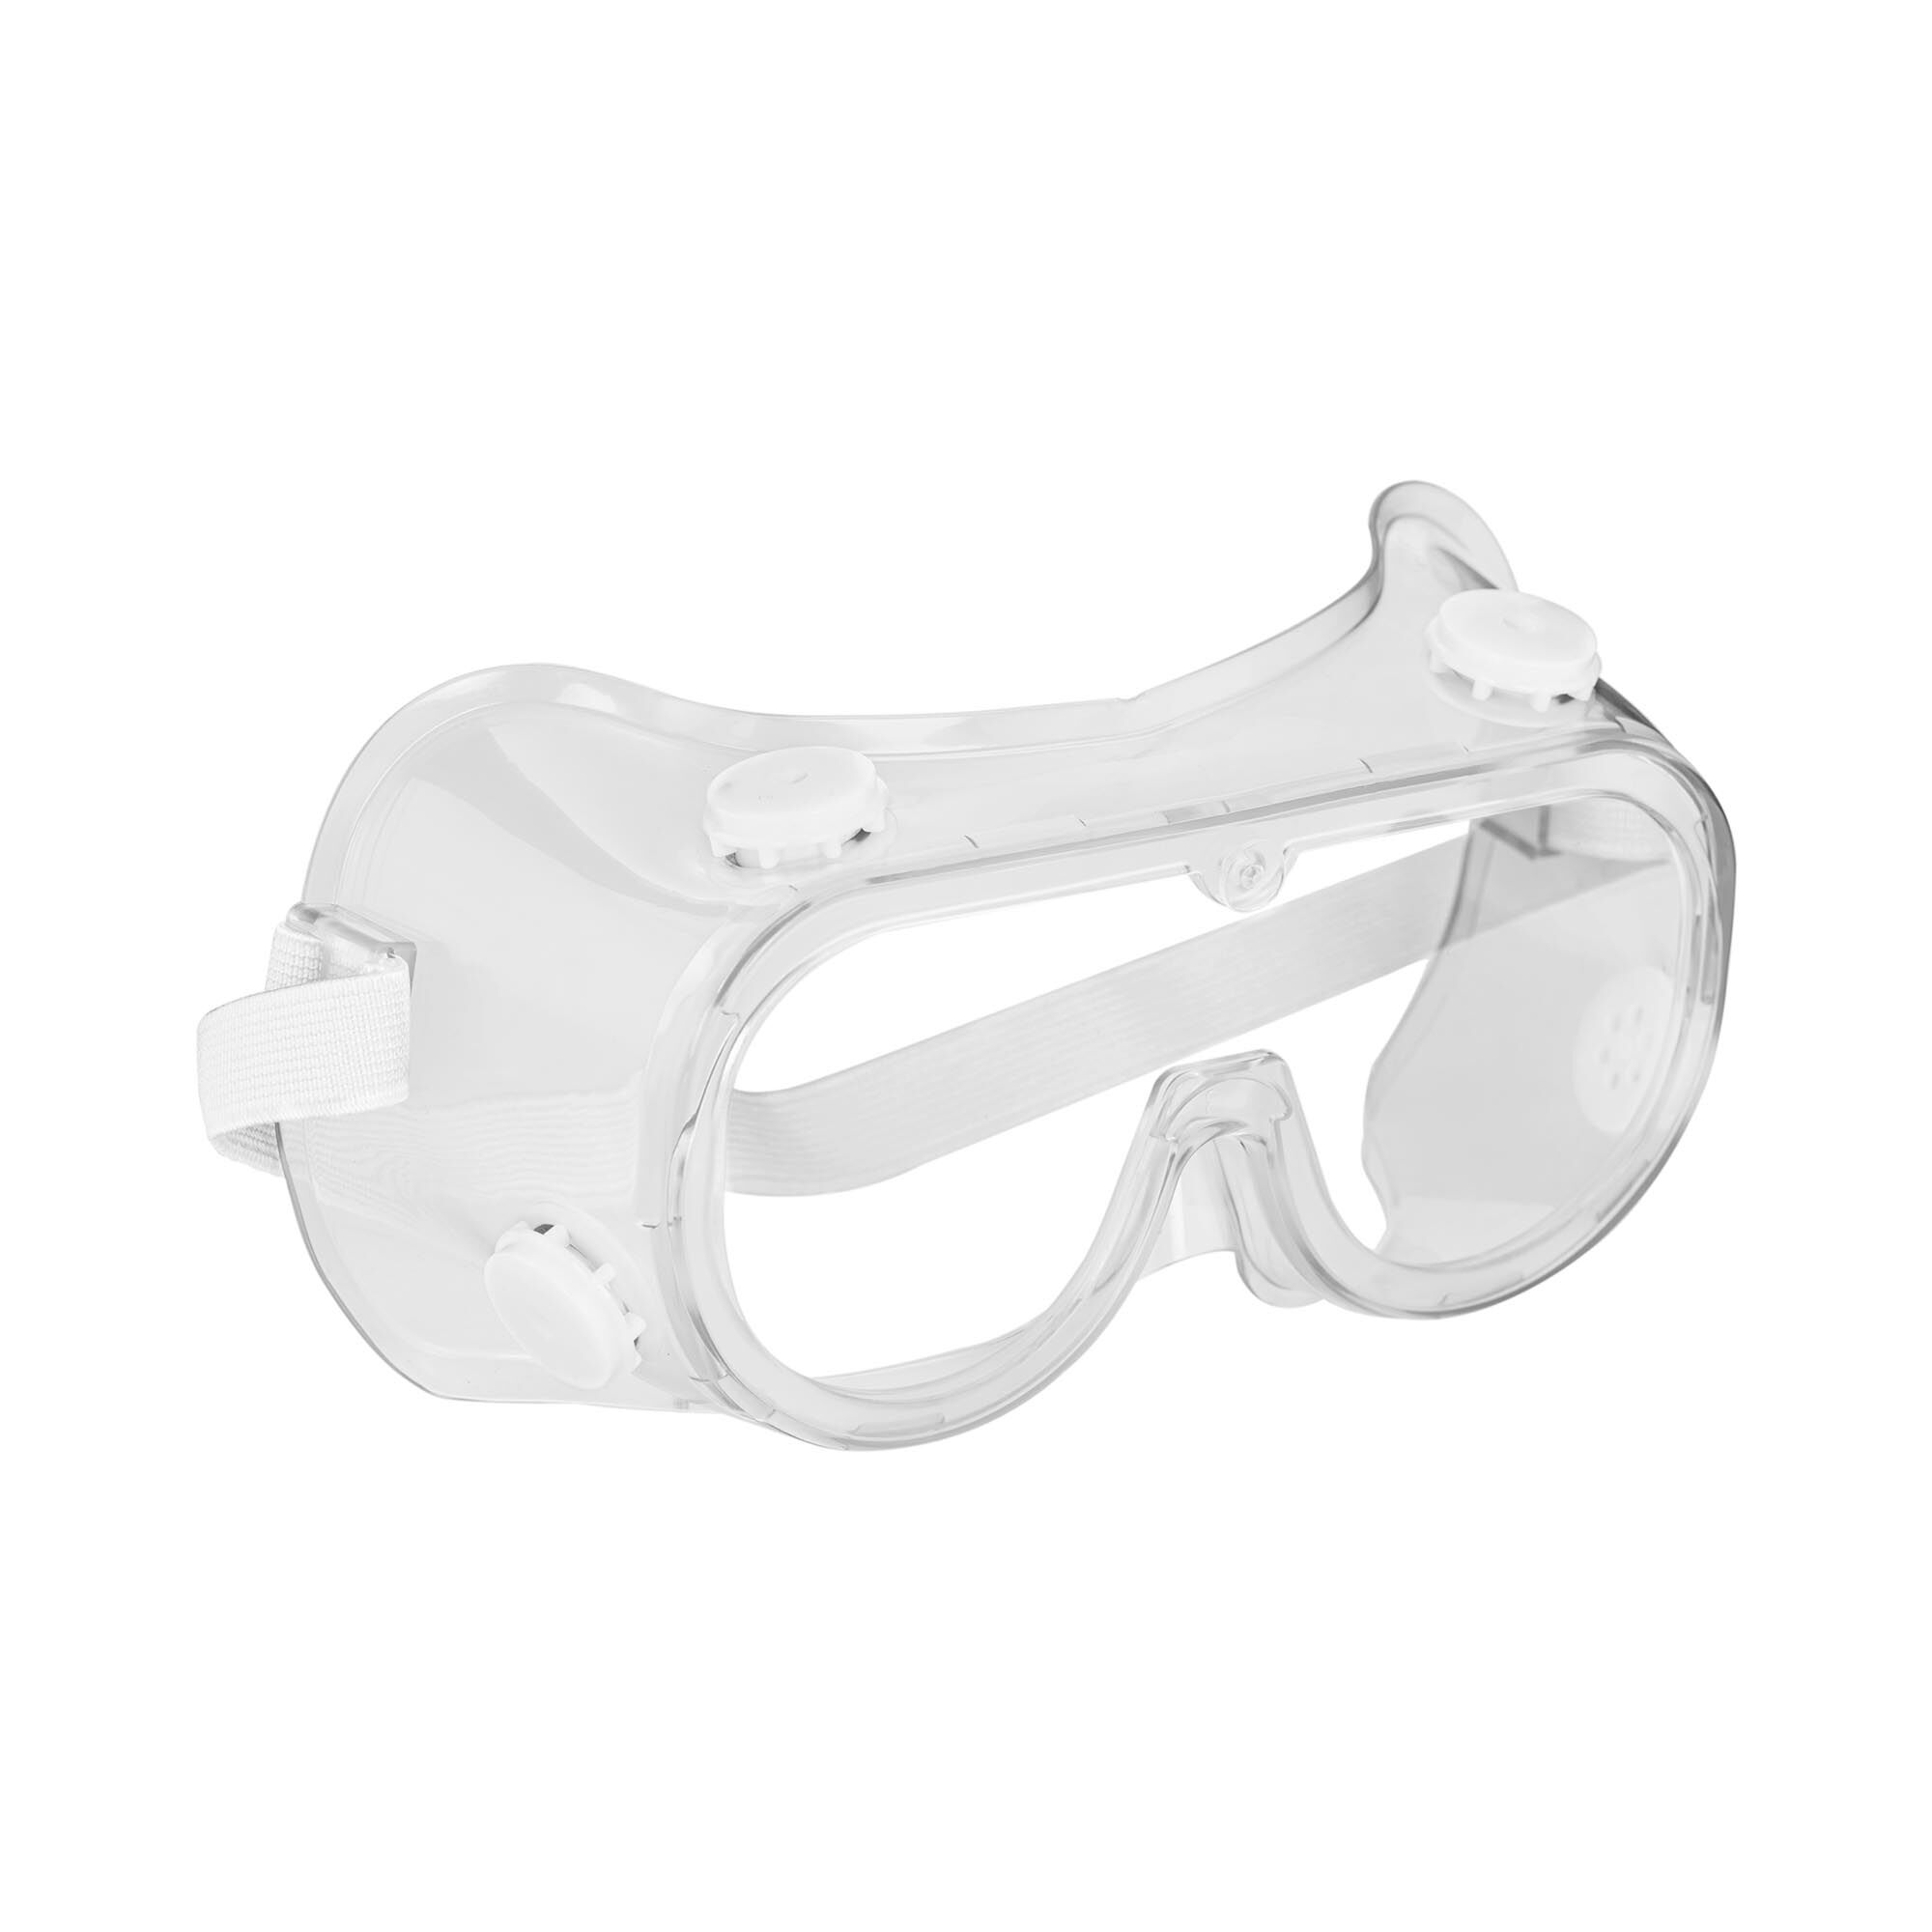 MSW Safety Glasses - set of 3 - clear - one size